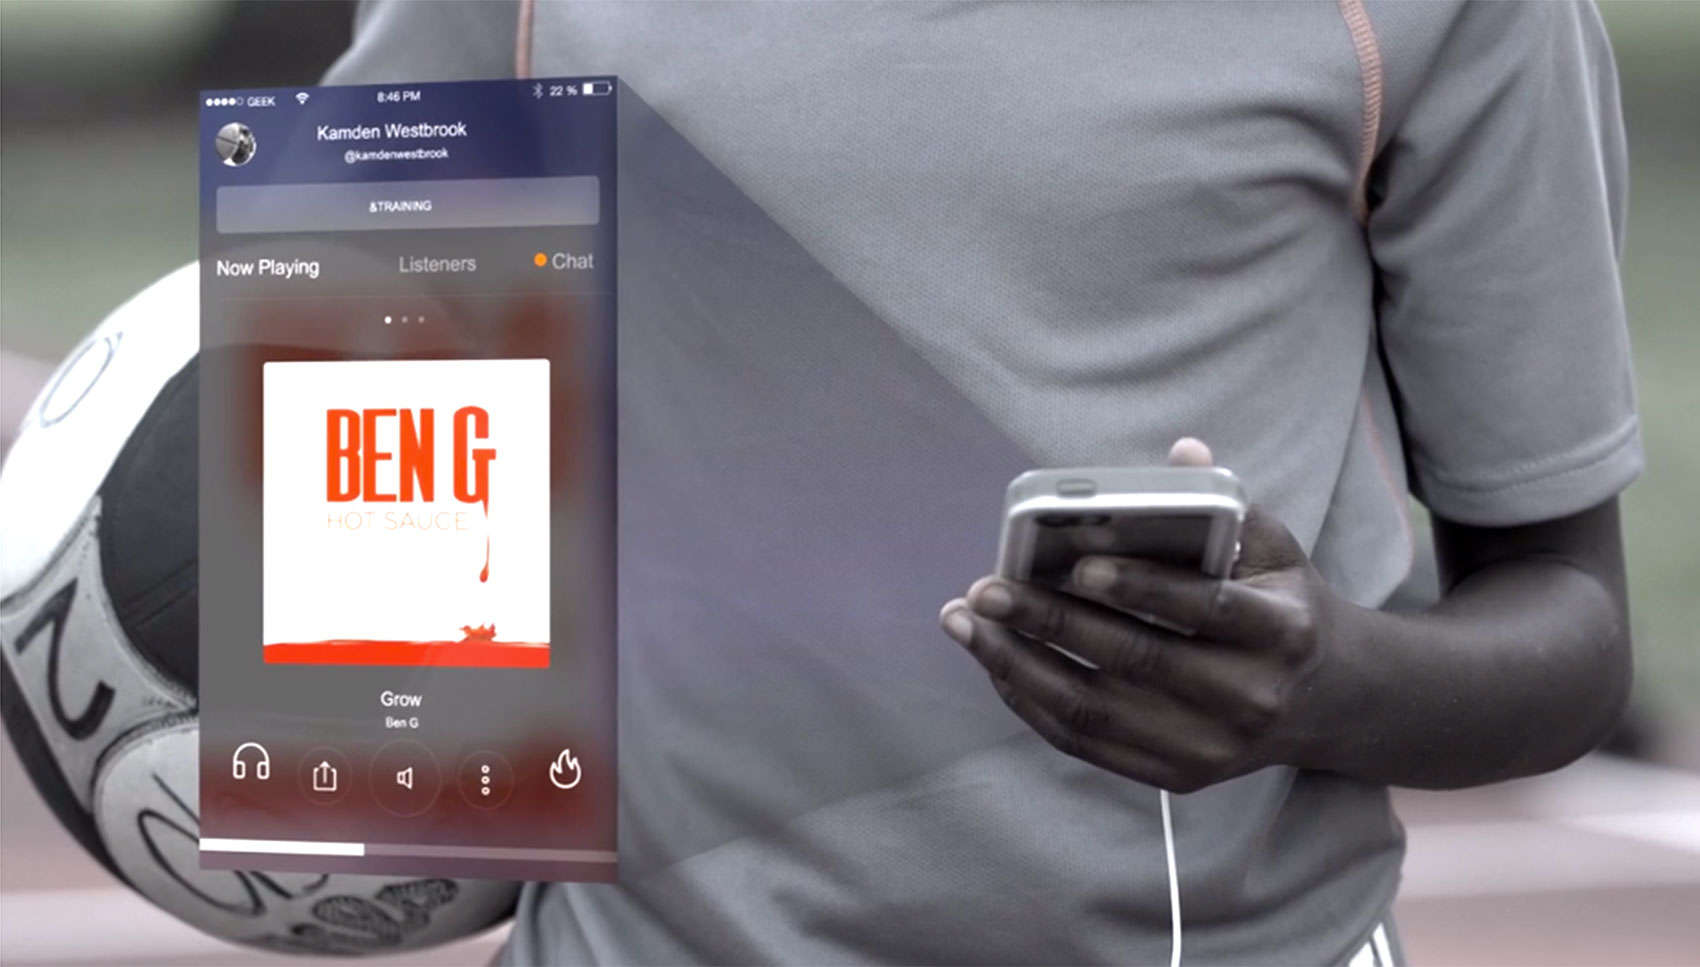 The Geekin Radio app lets users listen to music together in real time.